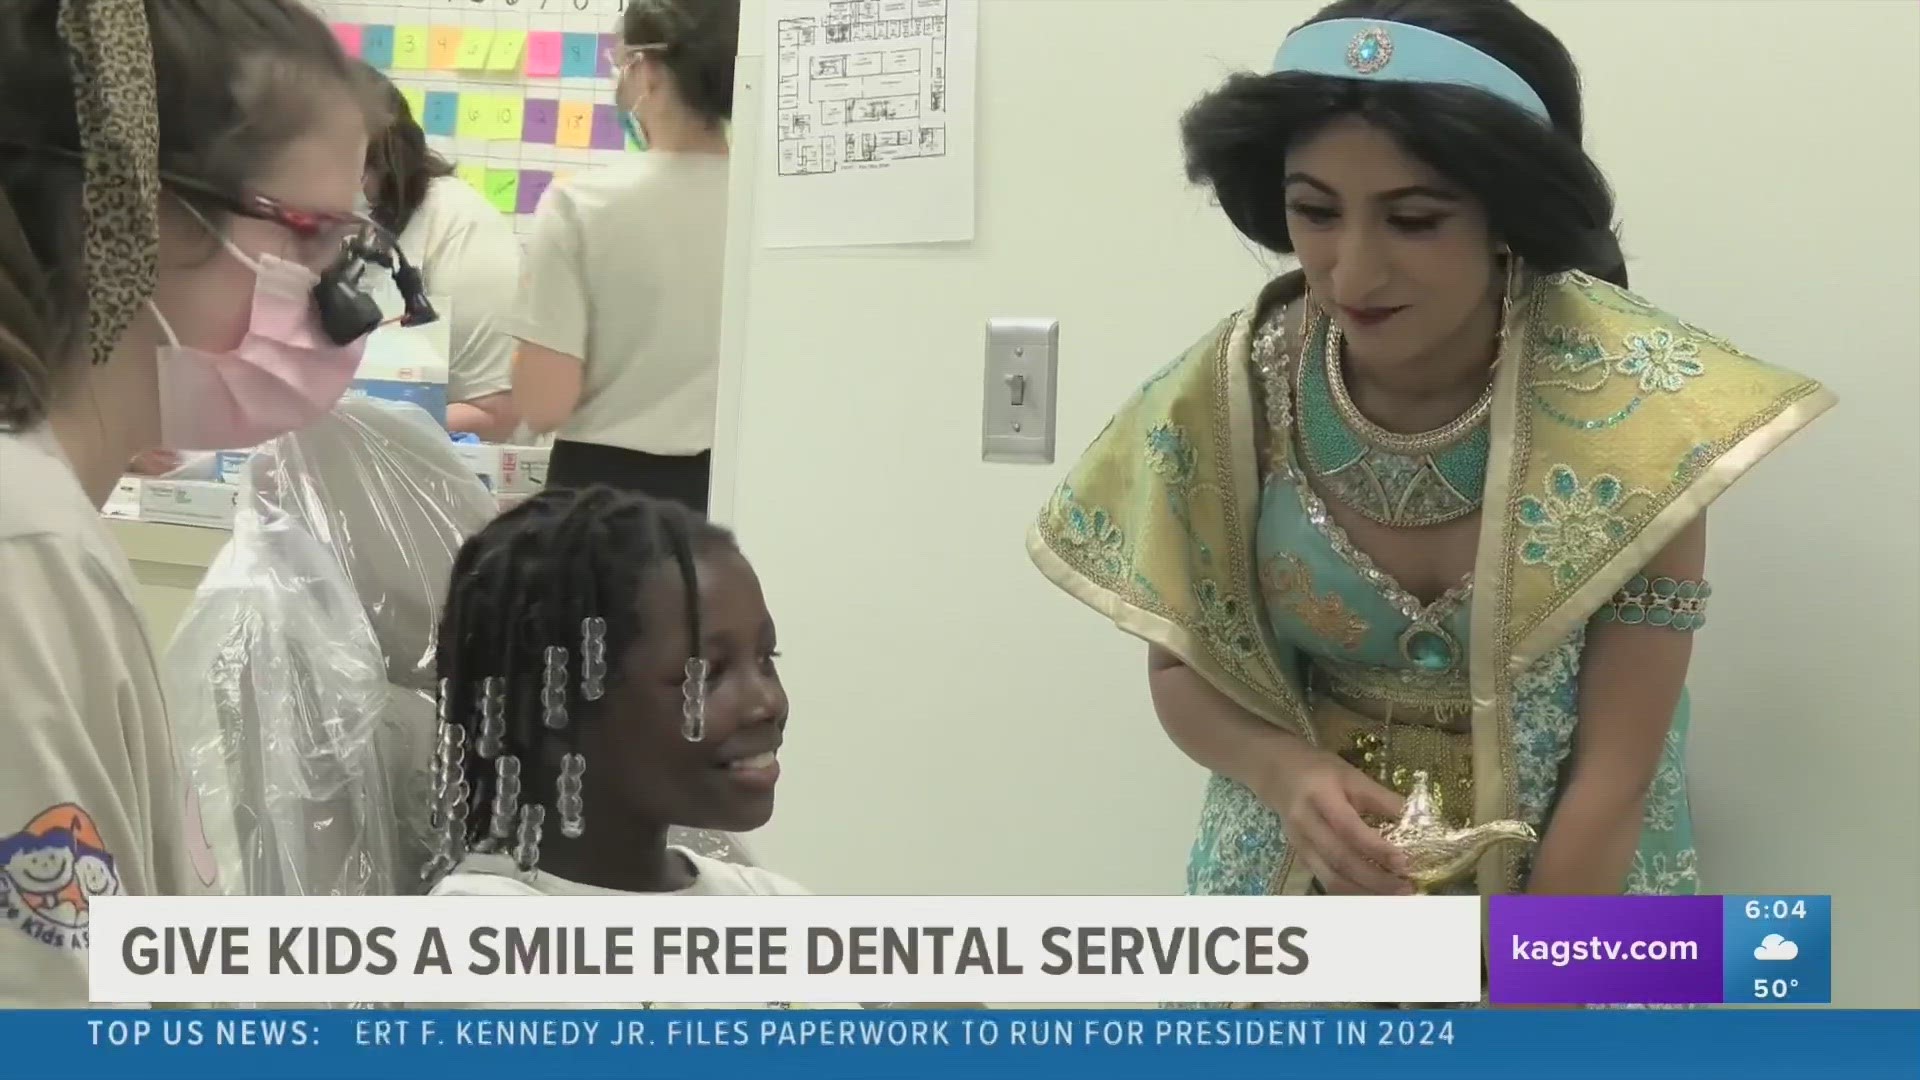 The program, which will take place on April 13, will offer preschool and elementary-aged children free dental services, including exams, cleanings, and more.